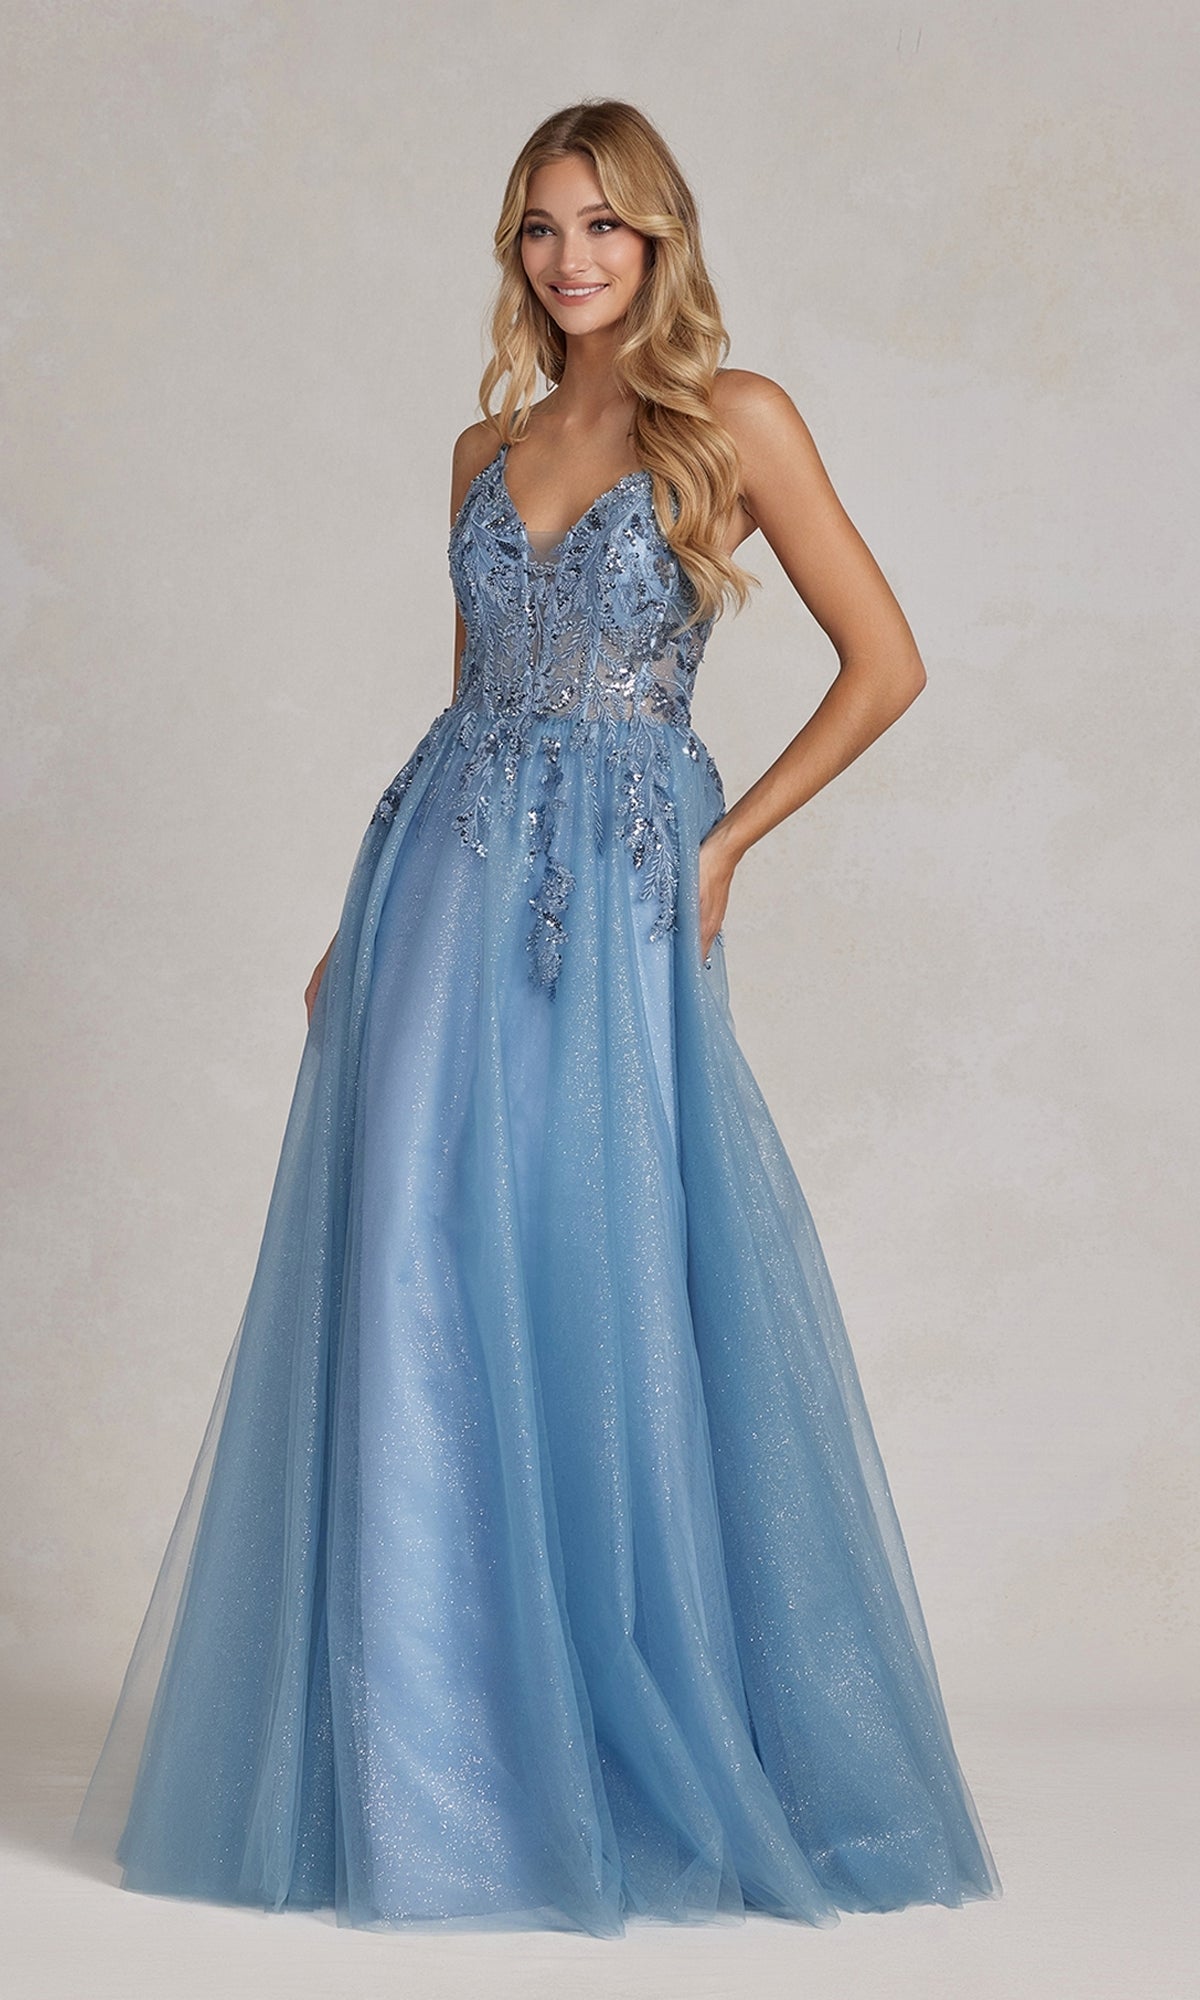  Glitter-Tulle Dusty Blue Long Prom Ball Gown E1125